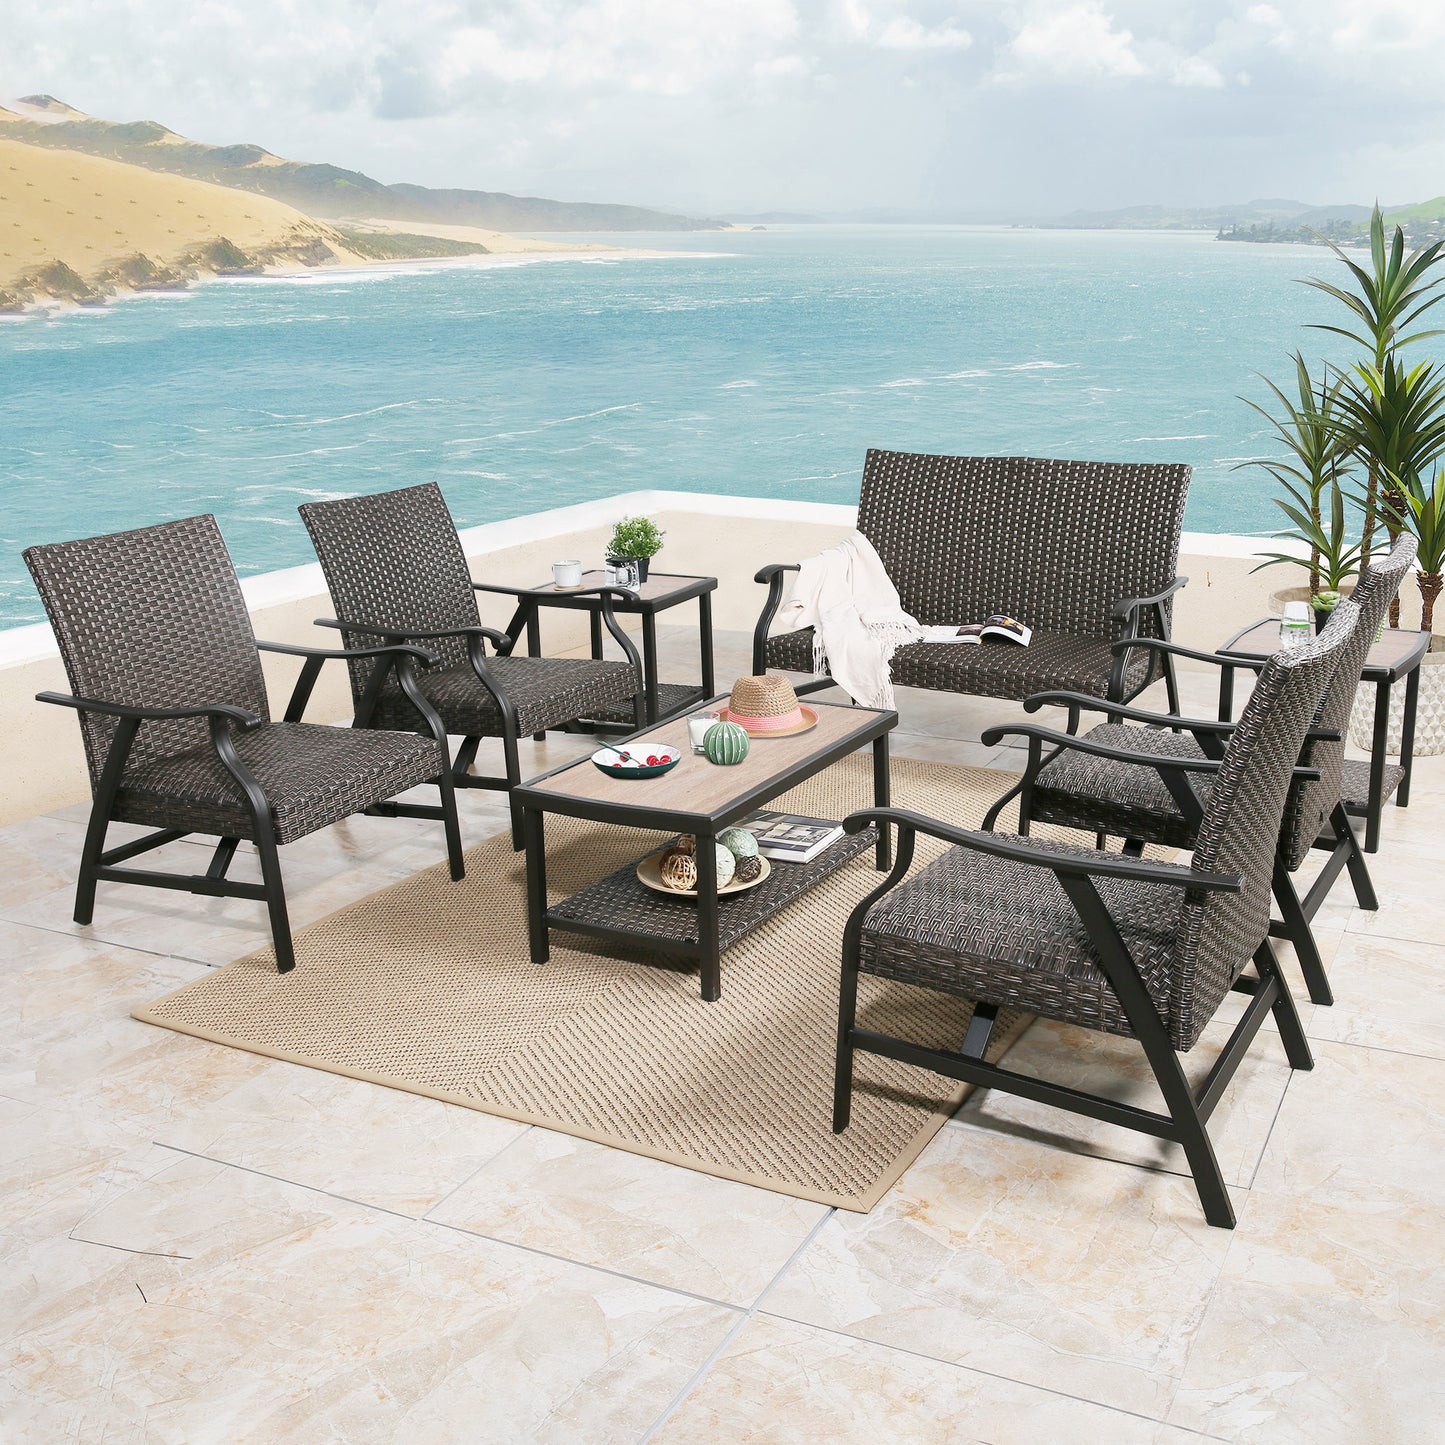 8-Piece Indoor Outdoor Wicker Padded Conversation Set Patio Rattan Furniture Set with 4 Motion Rocking Armchairs, 1 Loveseat, 1 Alucobond Coffee Table and 2 Side Table for 6 Persons